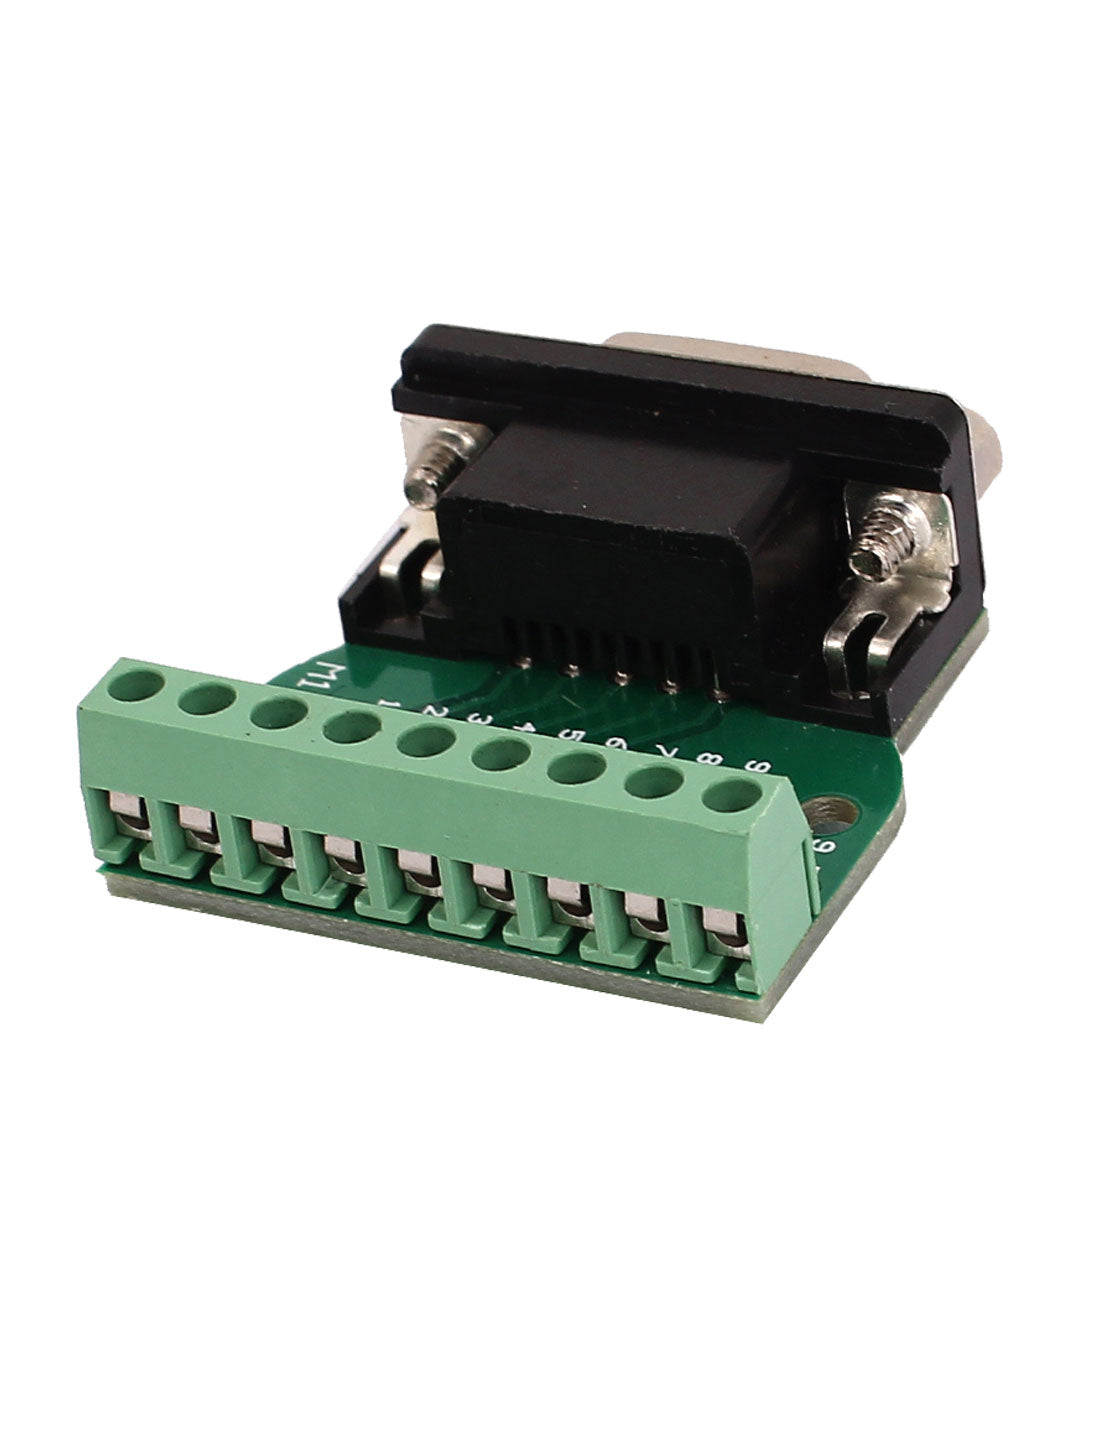 uxcell Uxcell DB9 D-SUB Female Adapter Plate RS232 to 9P Terminal Breakout Board with Positioning Nuts Signal Module